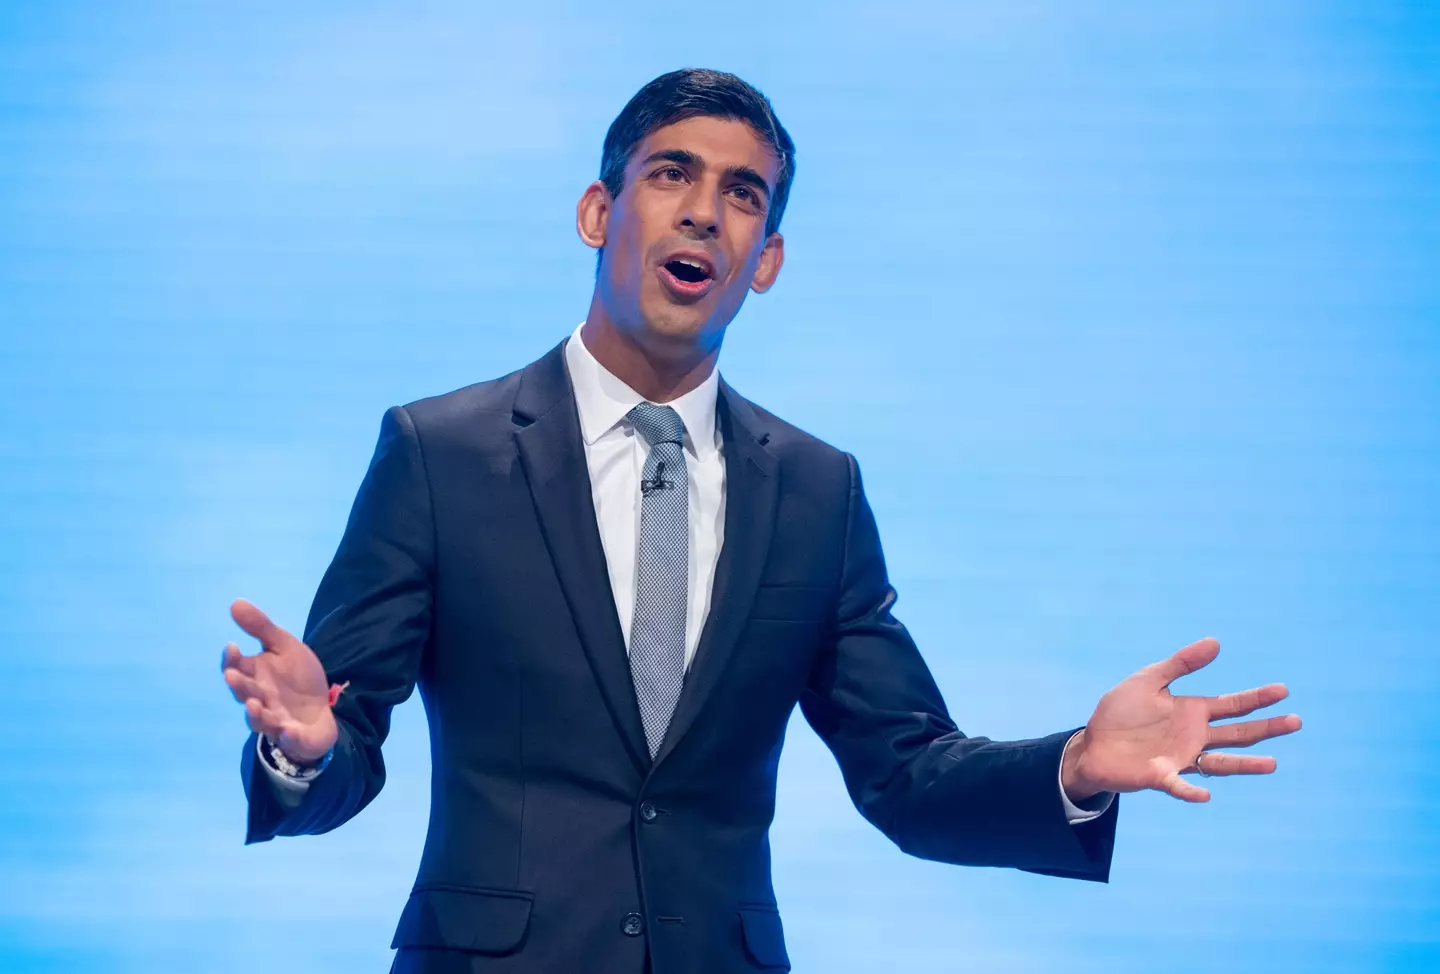 Rishi Sunak is anticipated as becoming the UK's next Prime Minister.